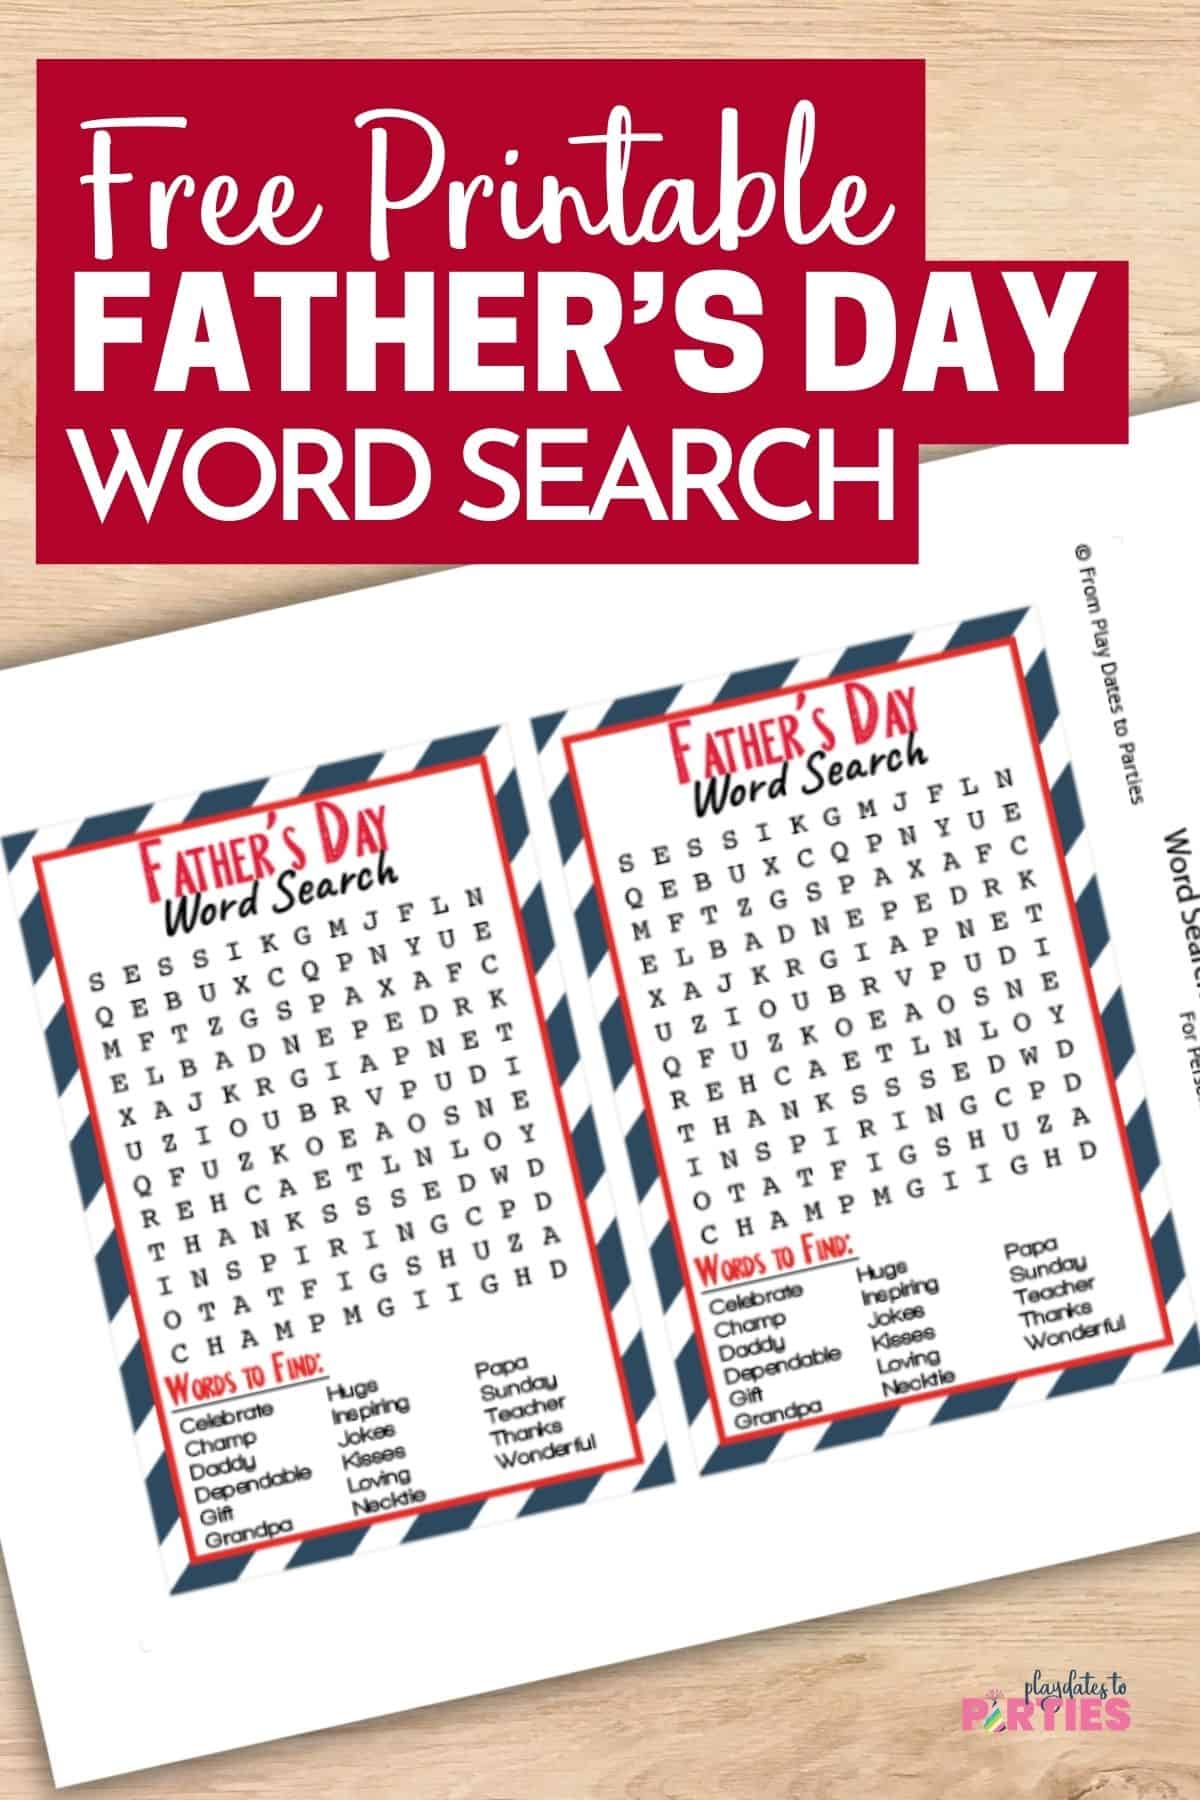 Free Printable Father's Day word search pin image.